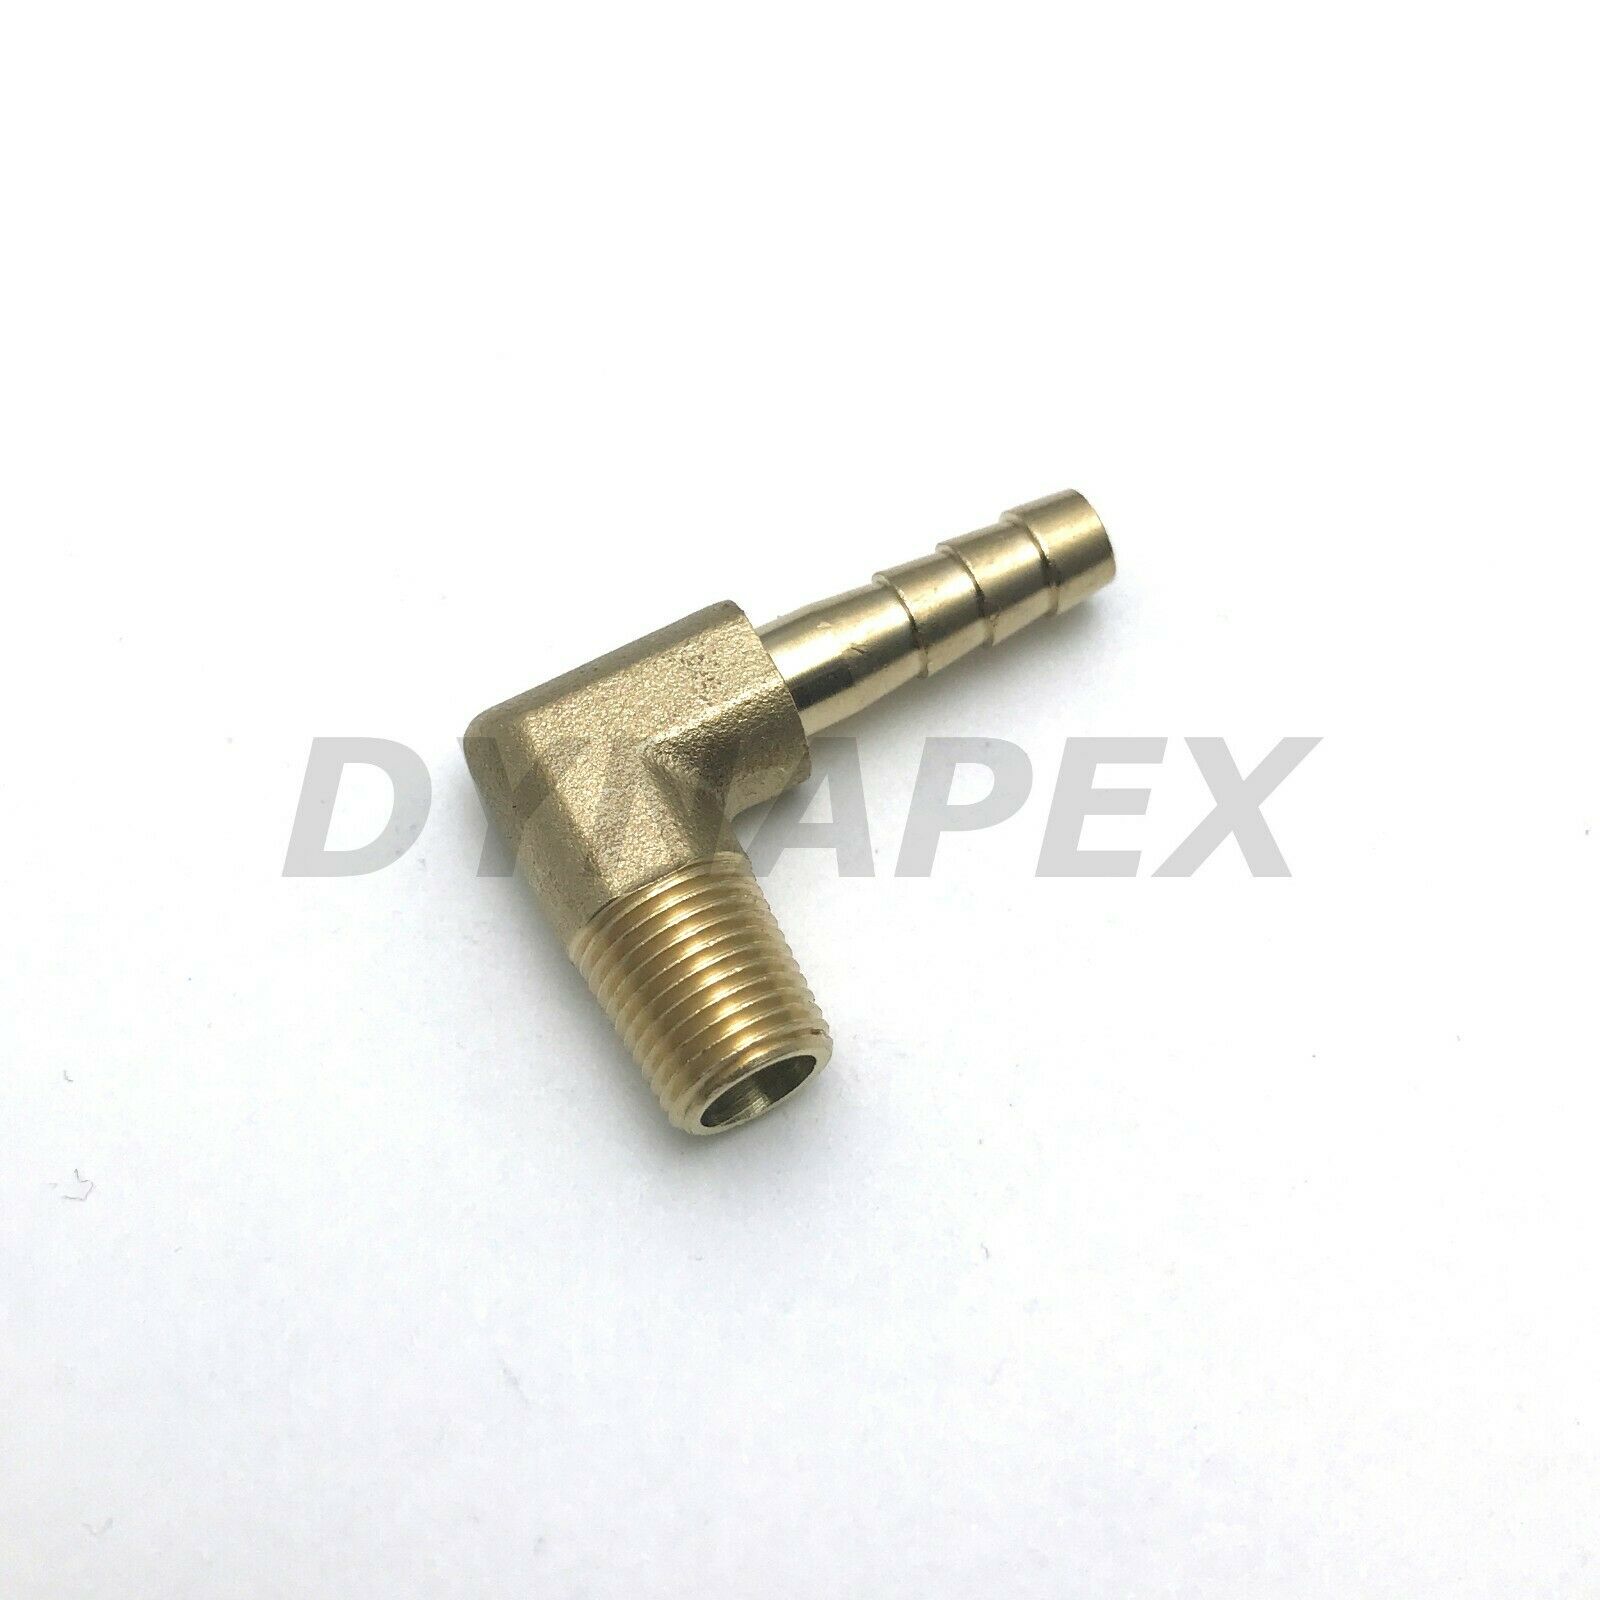 Details about   10x1/8 Inch NPT Male Threads x 6mm Inch Barb Elbow Fuel Hose Barb Fitting